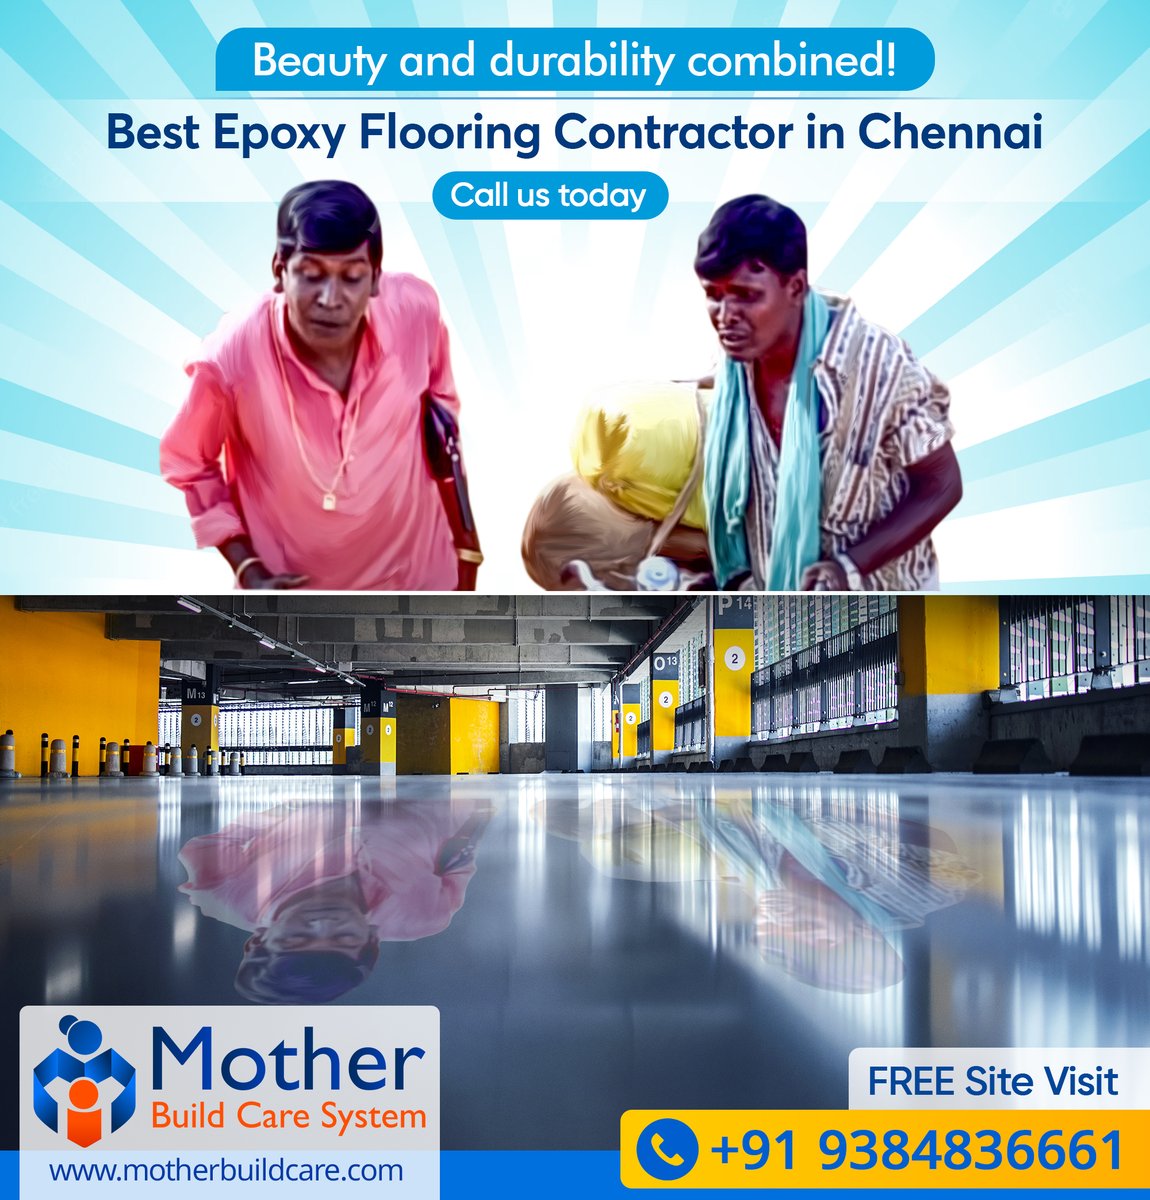 Upgrade your floors, upgrade your space!
Affordable and the most reliable Epoxy Flooring Contractor in Chennai and all over Tamilnadu.
📷 Call us now: +91 93848 36661
📷 Check out us - bit.ly/328S2P2
#epoxyflooring #resinfloor #flooringdesign #epoxyresin #crackrepair